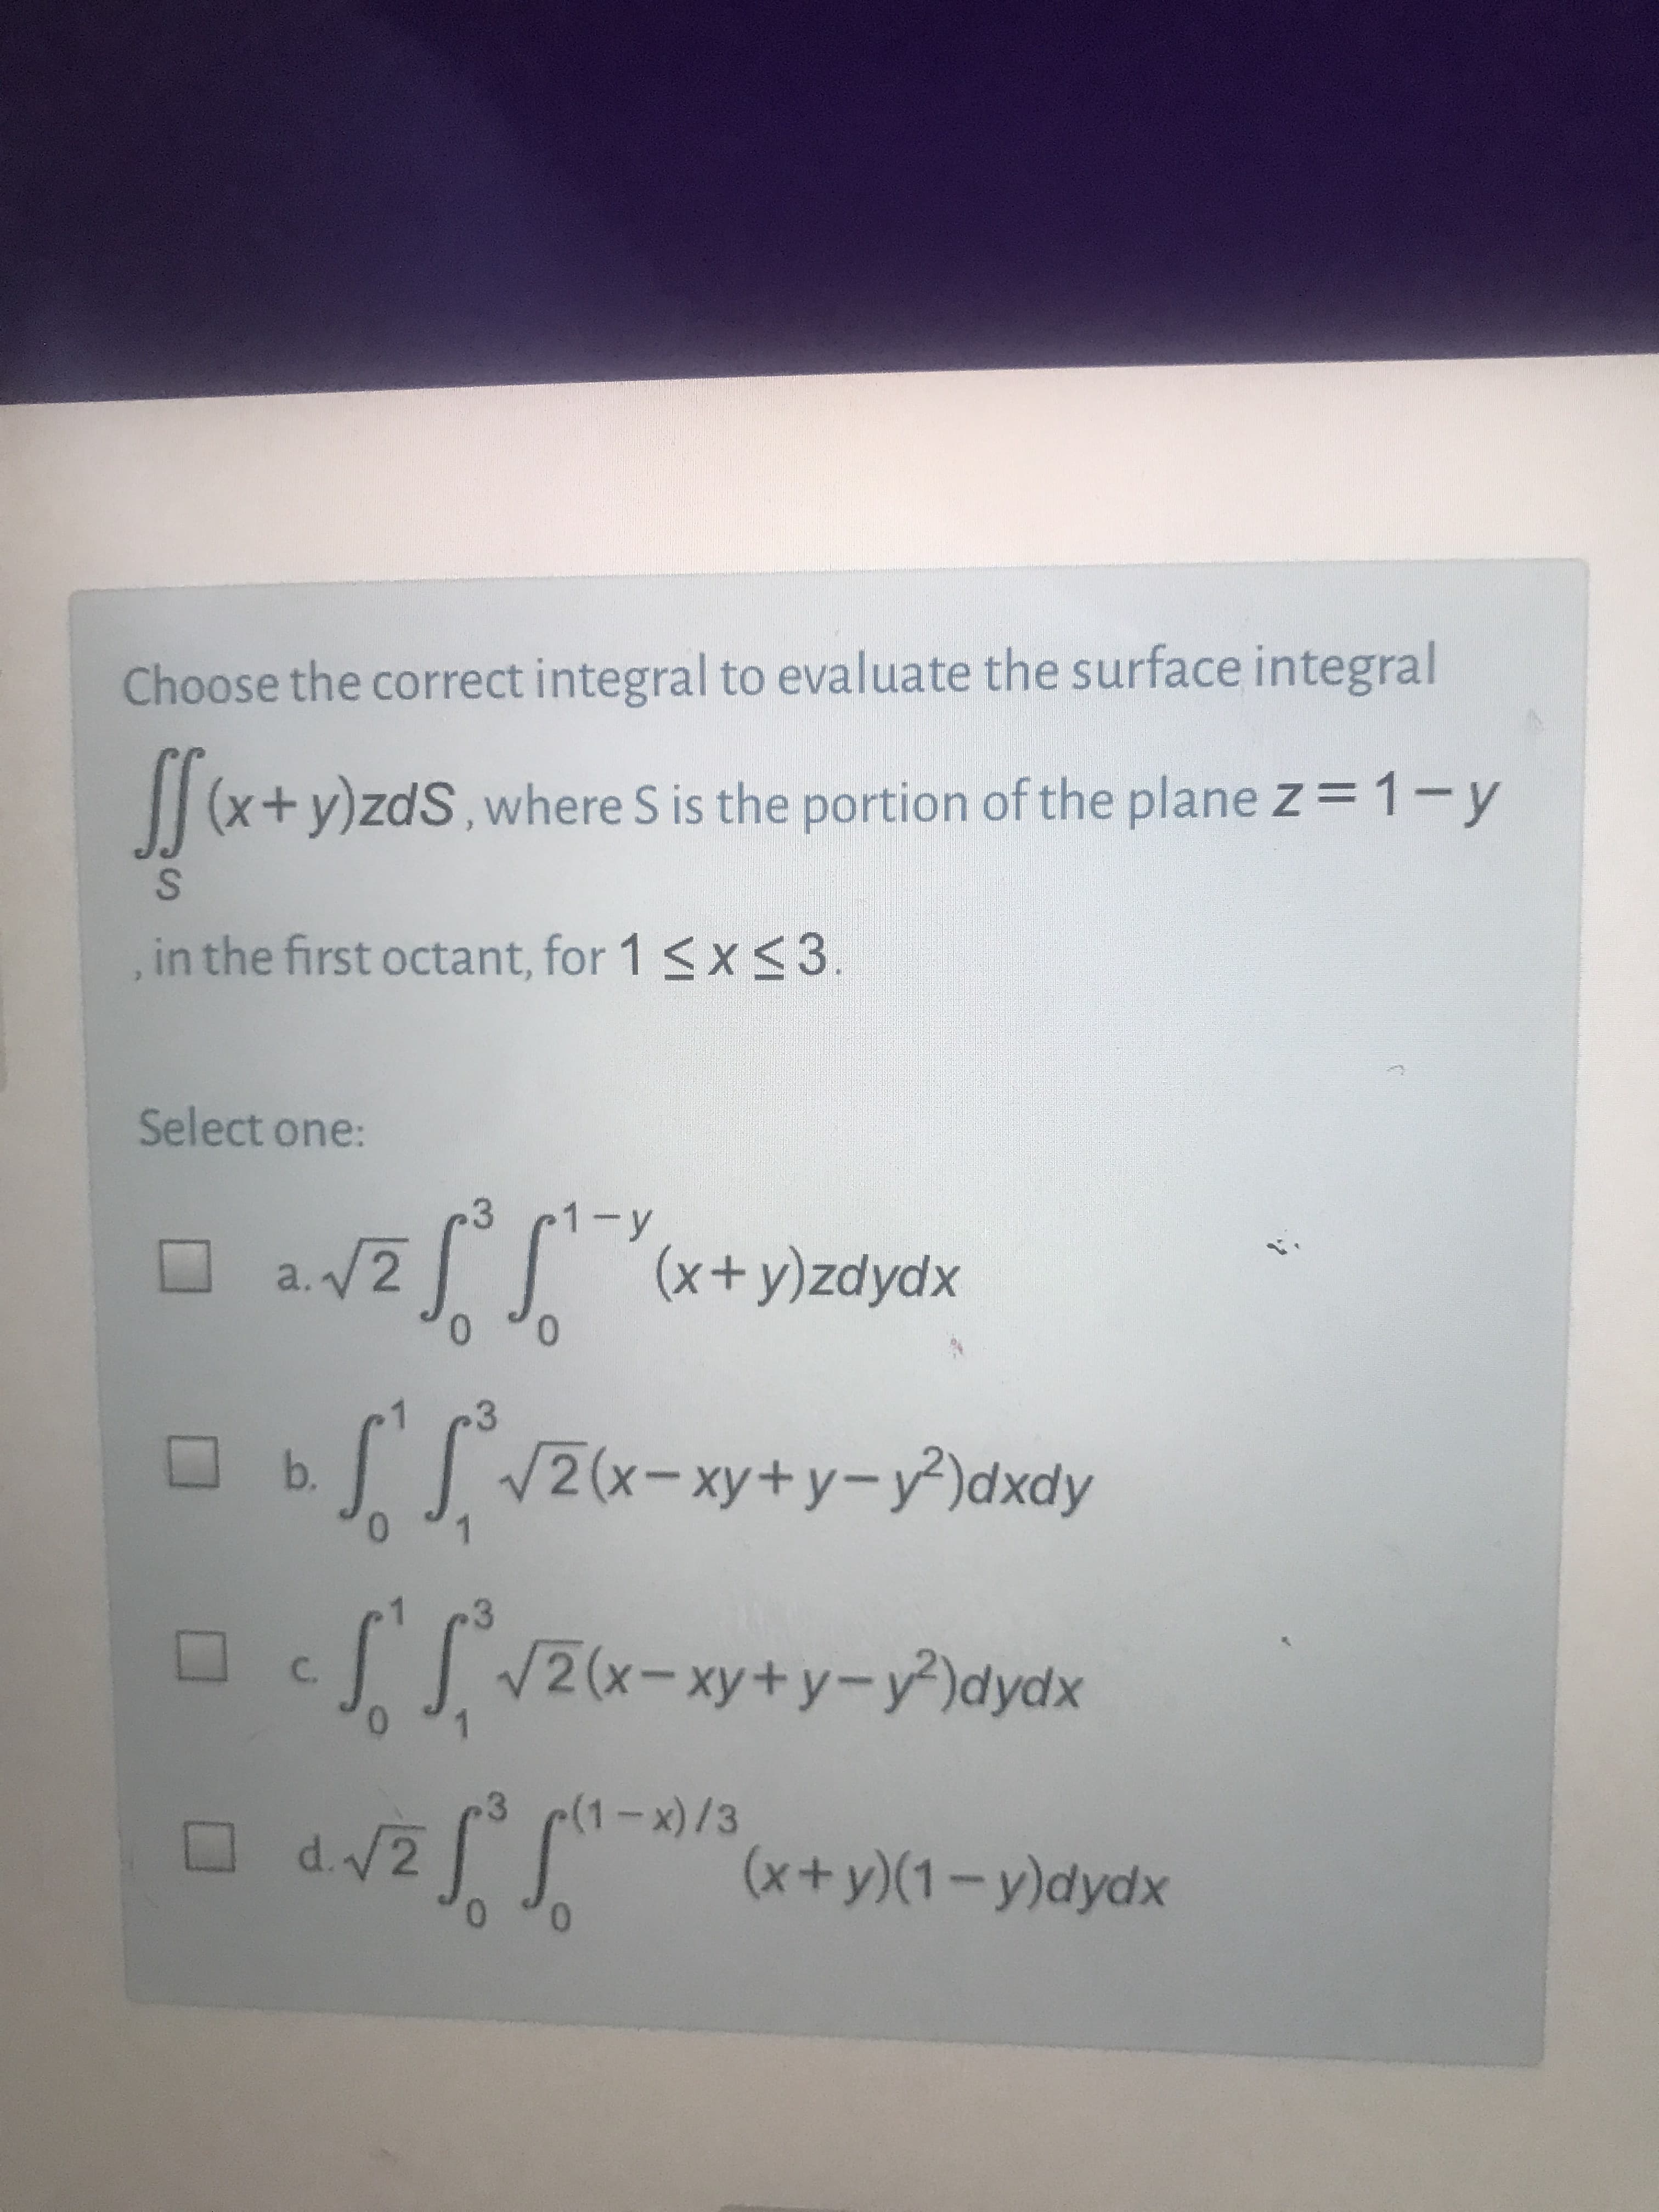 Choose the correct integral to evaluate the surface integral
(x+y)zdS,where S is the portion of the plane z = 1-y
in the first octant, for 1 <x<3.
